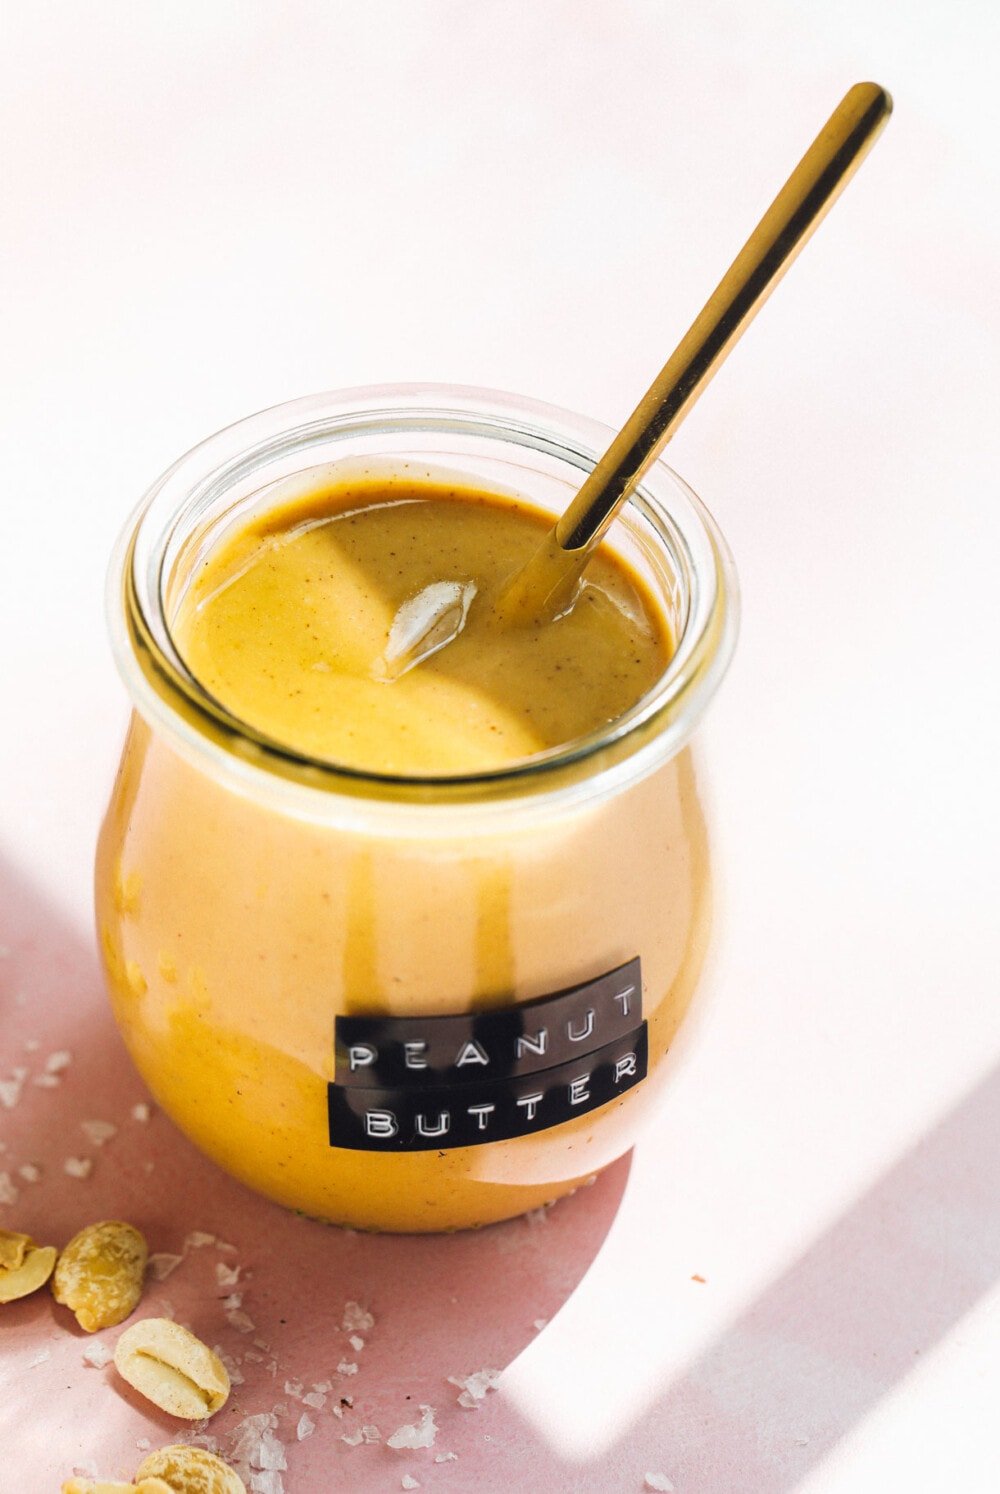 homemade peanut butter in glass jar with gold spoon